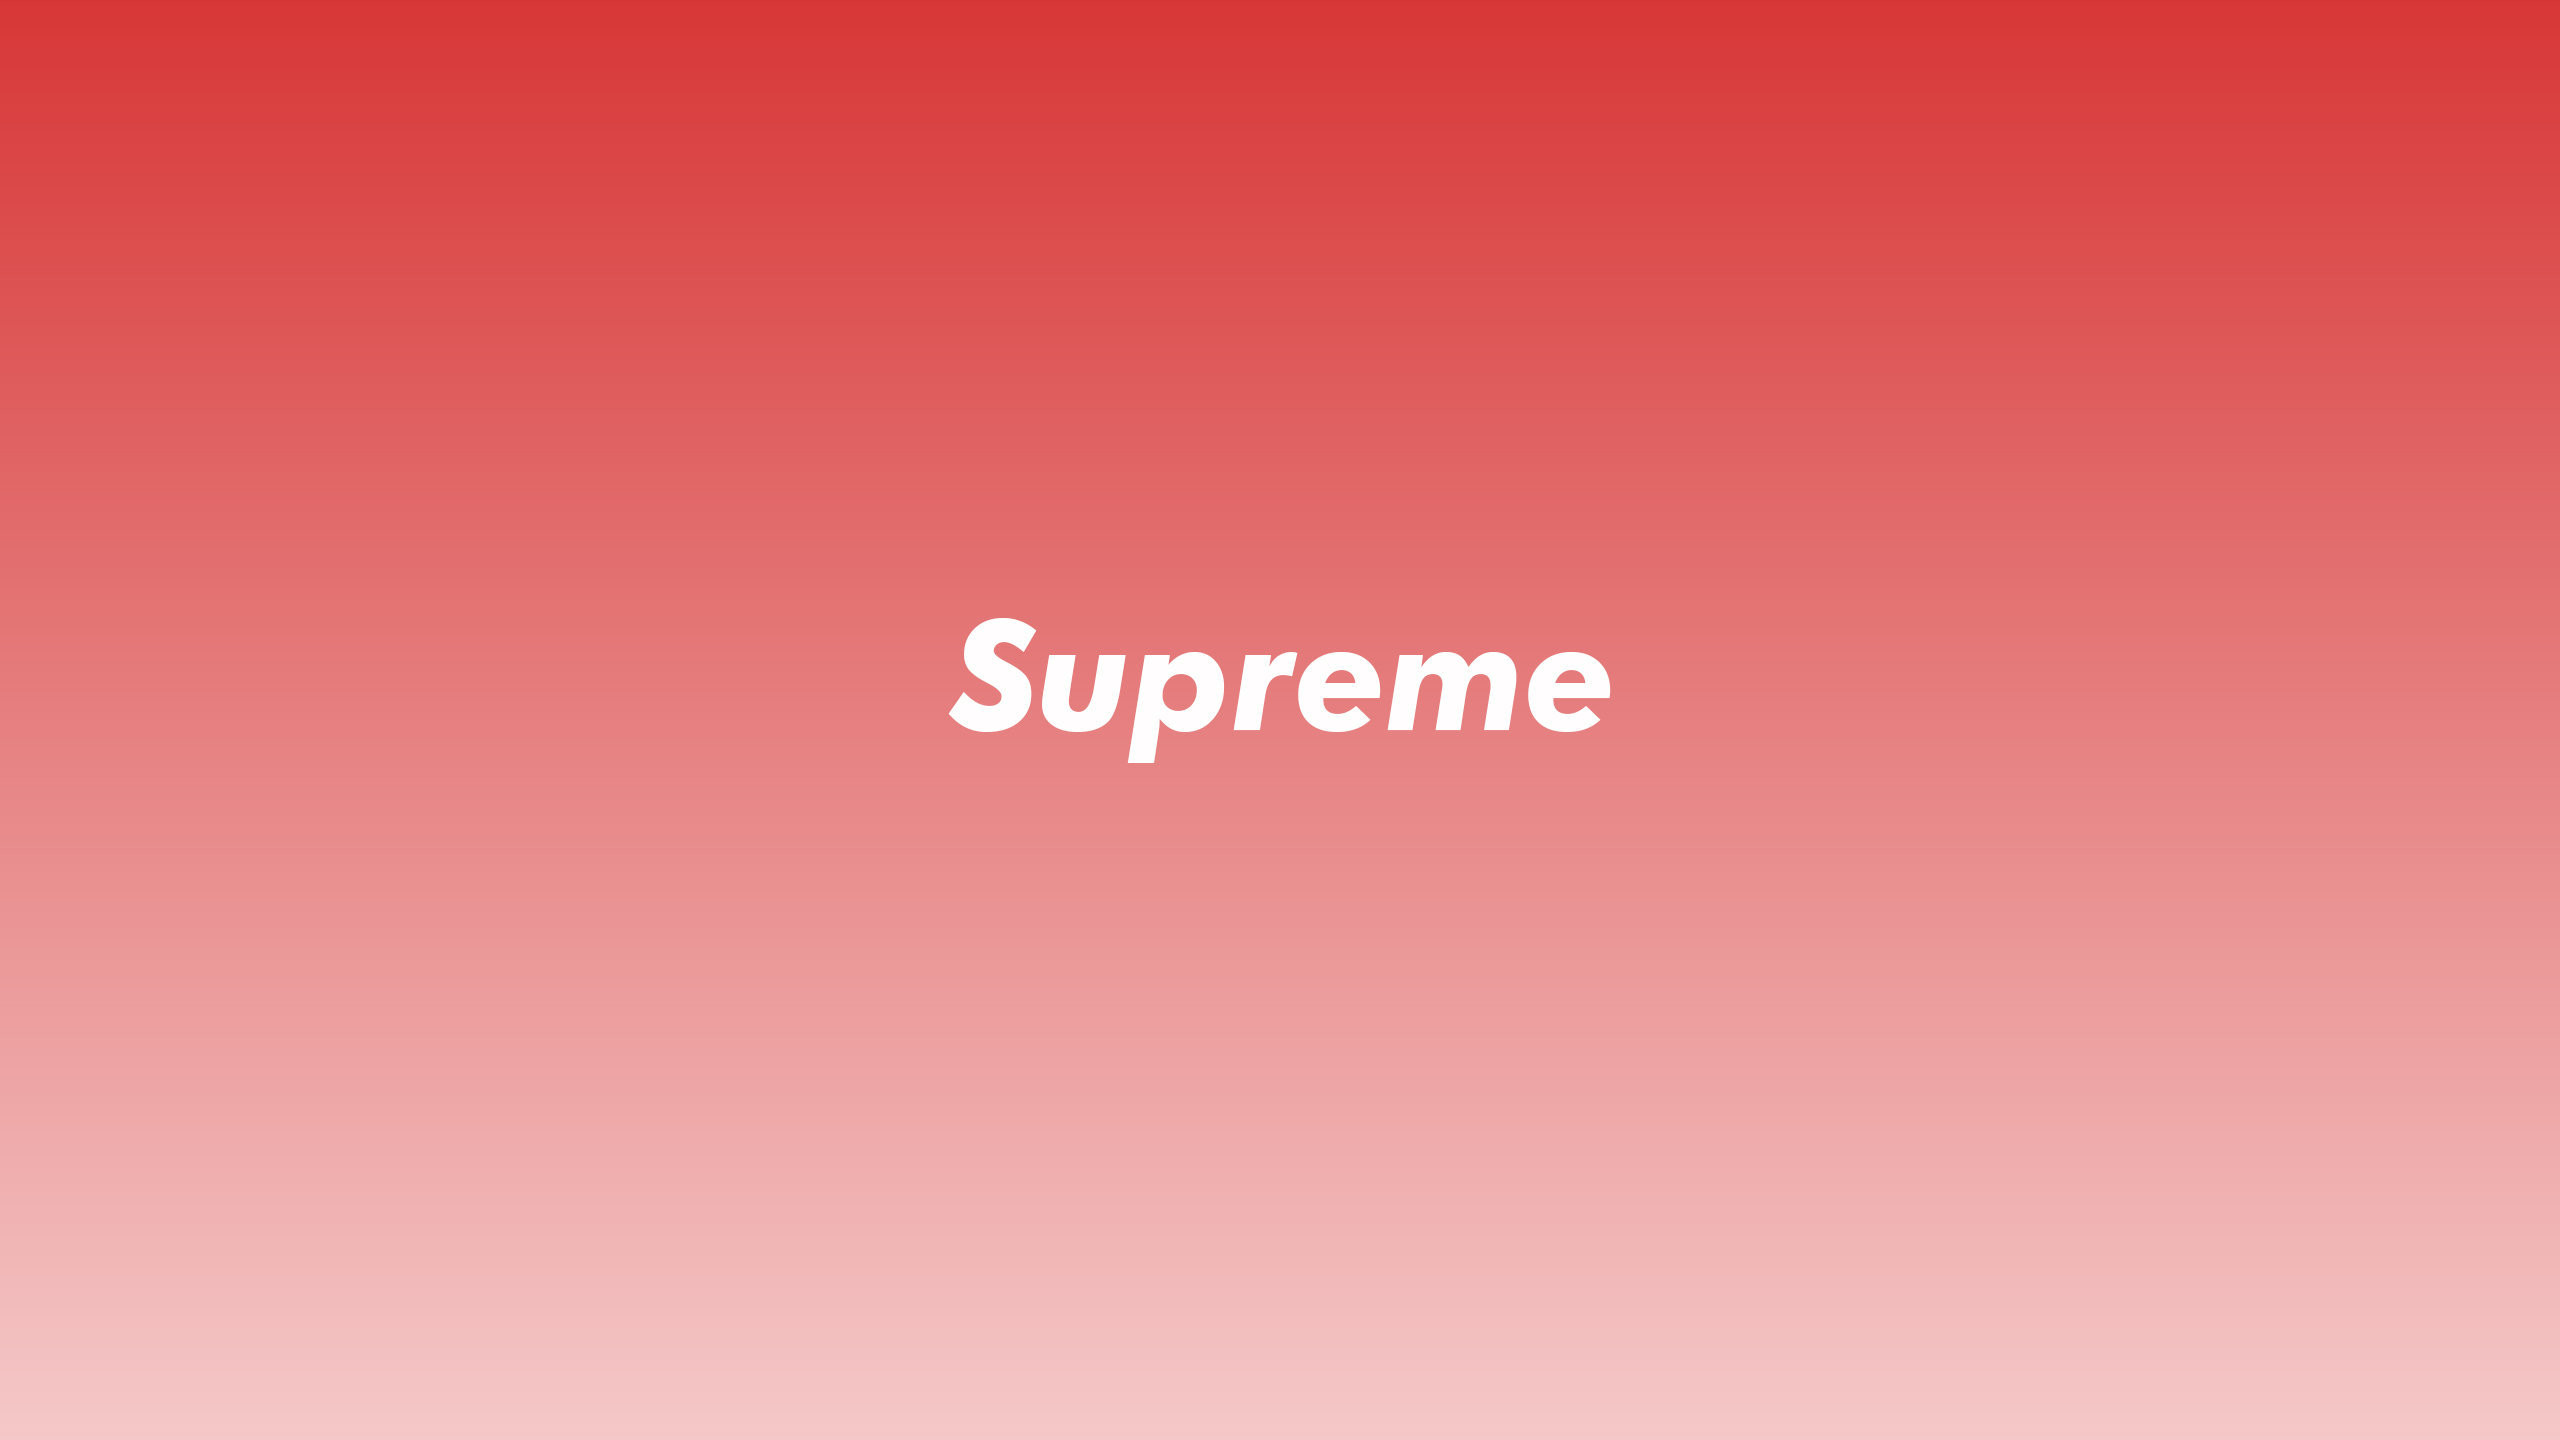 Download the Supreme Minimal Red wallpaper below for your mobile device Android phones, iPhone